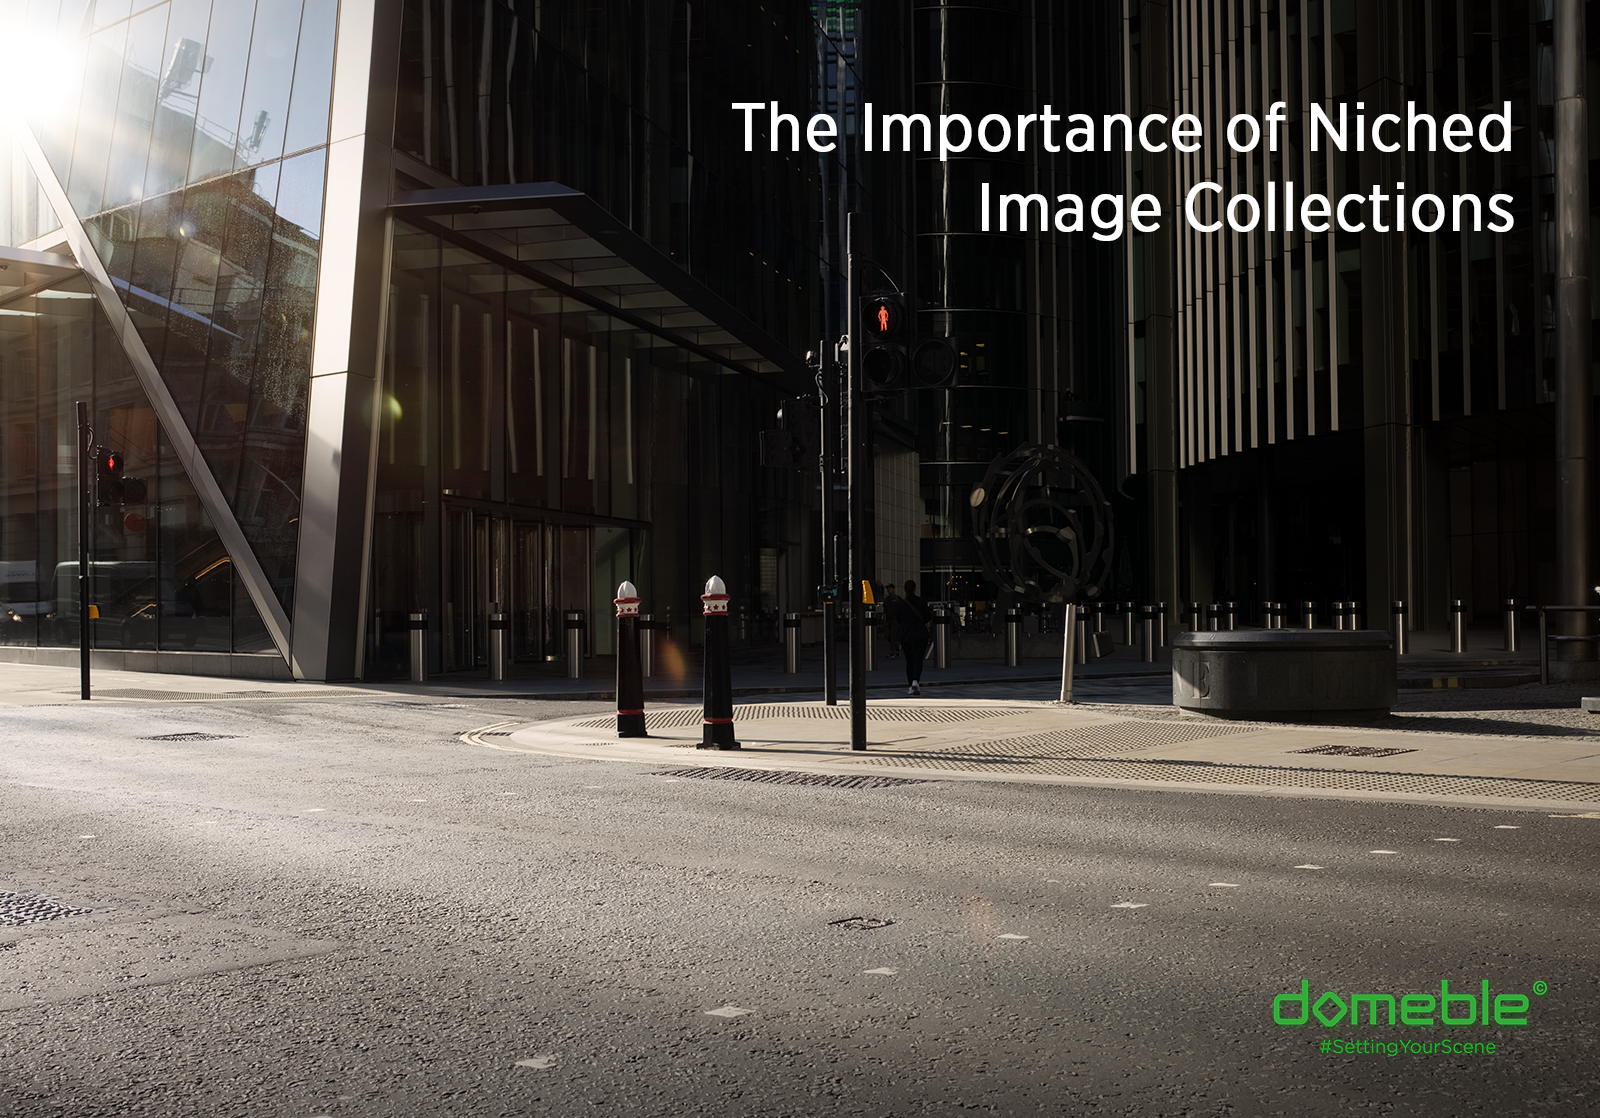 The Importance of Niched Image Collections